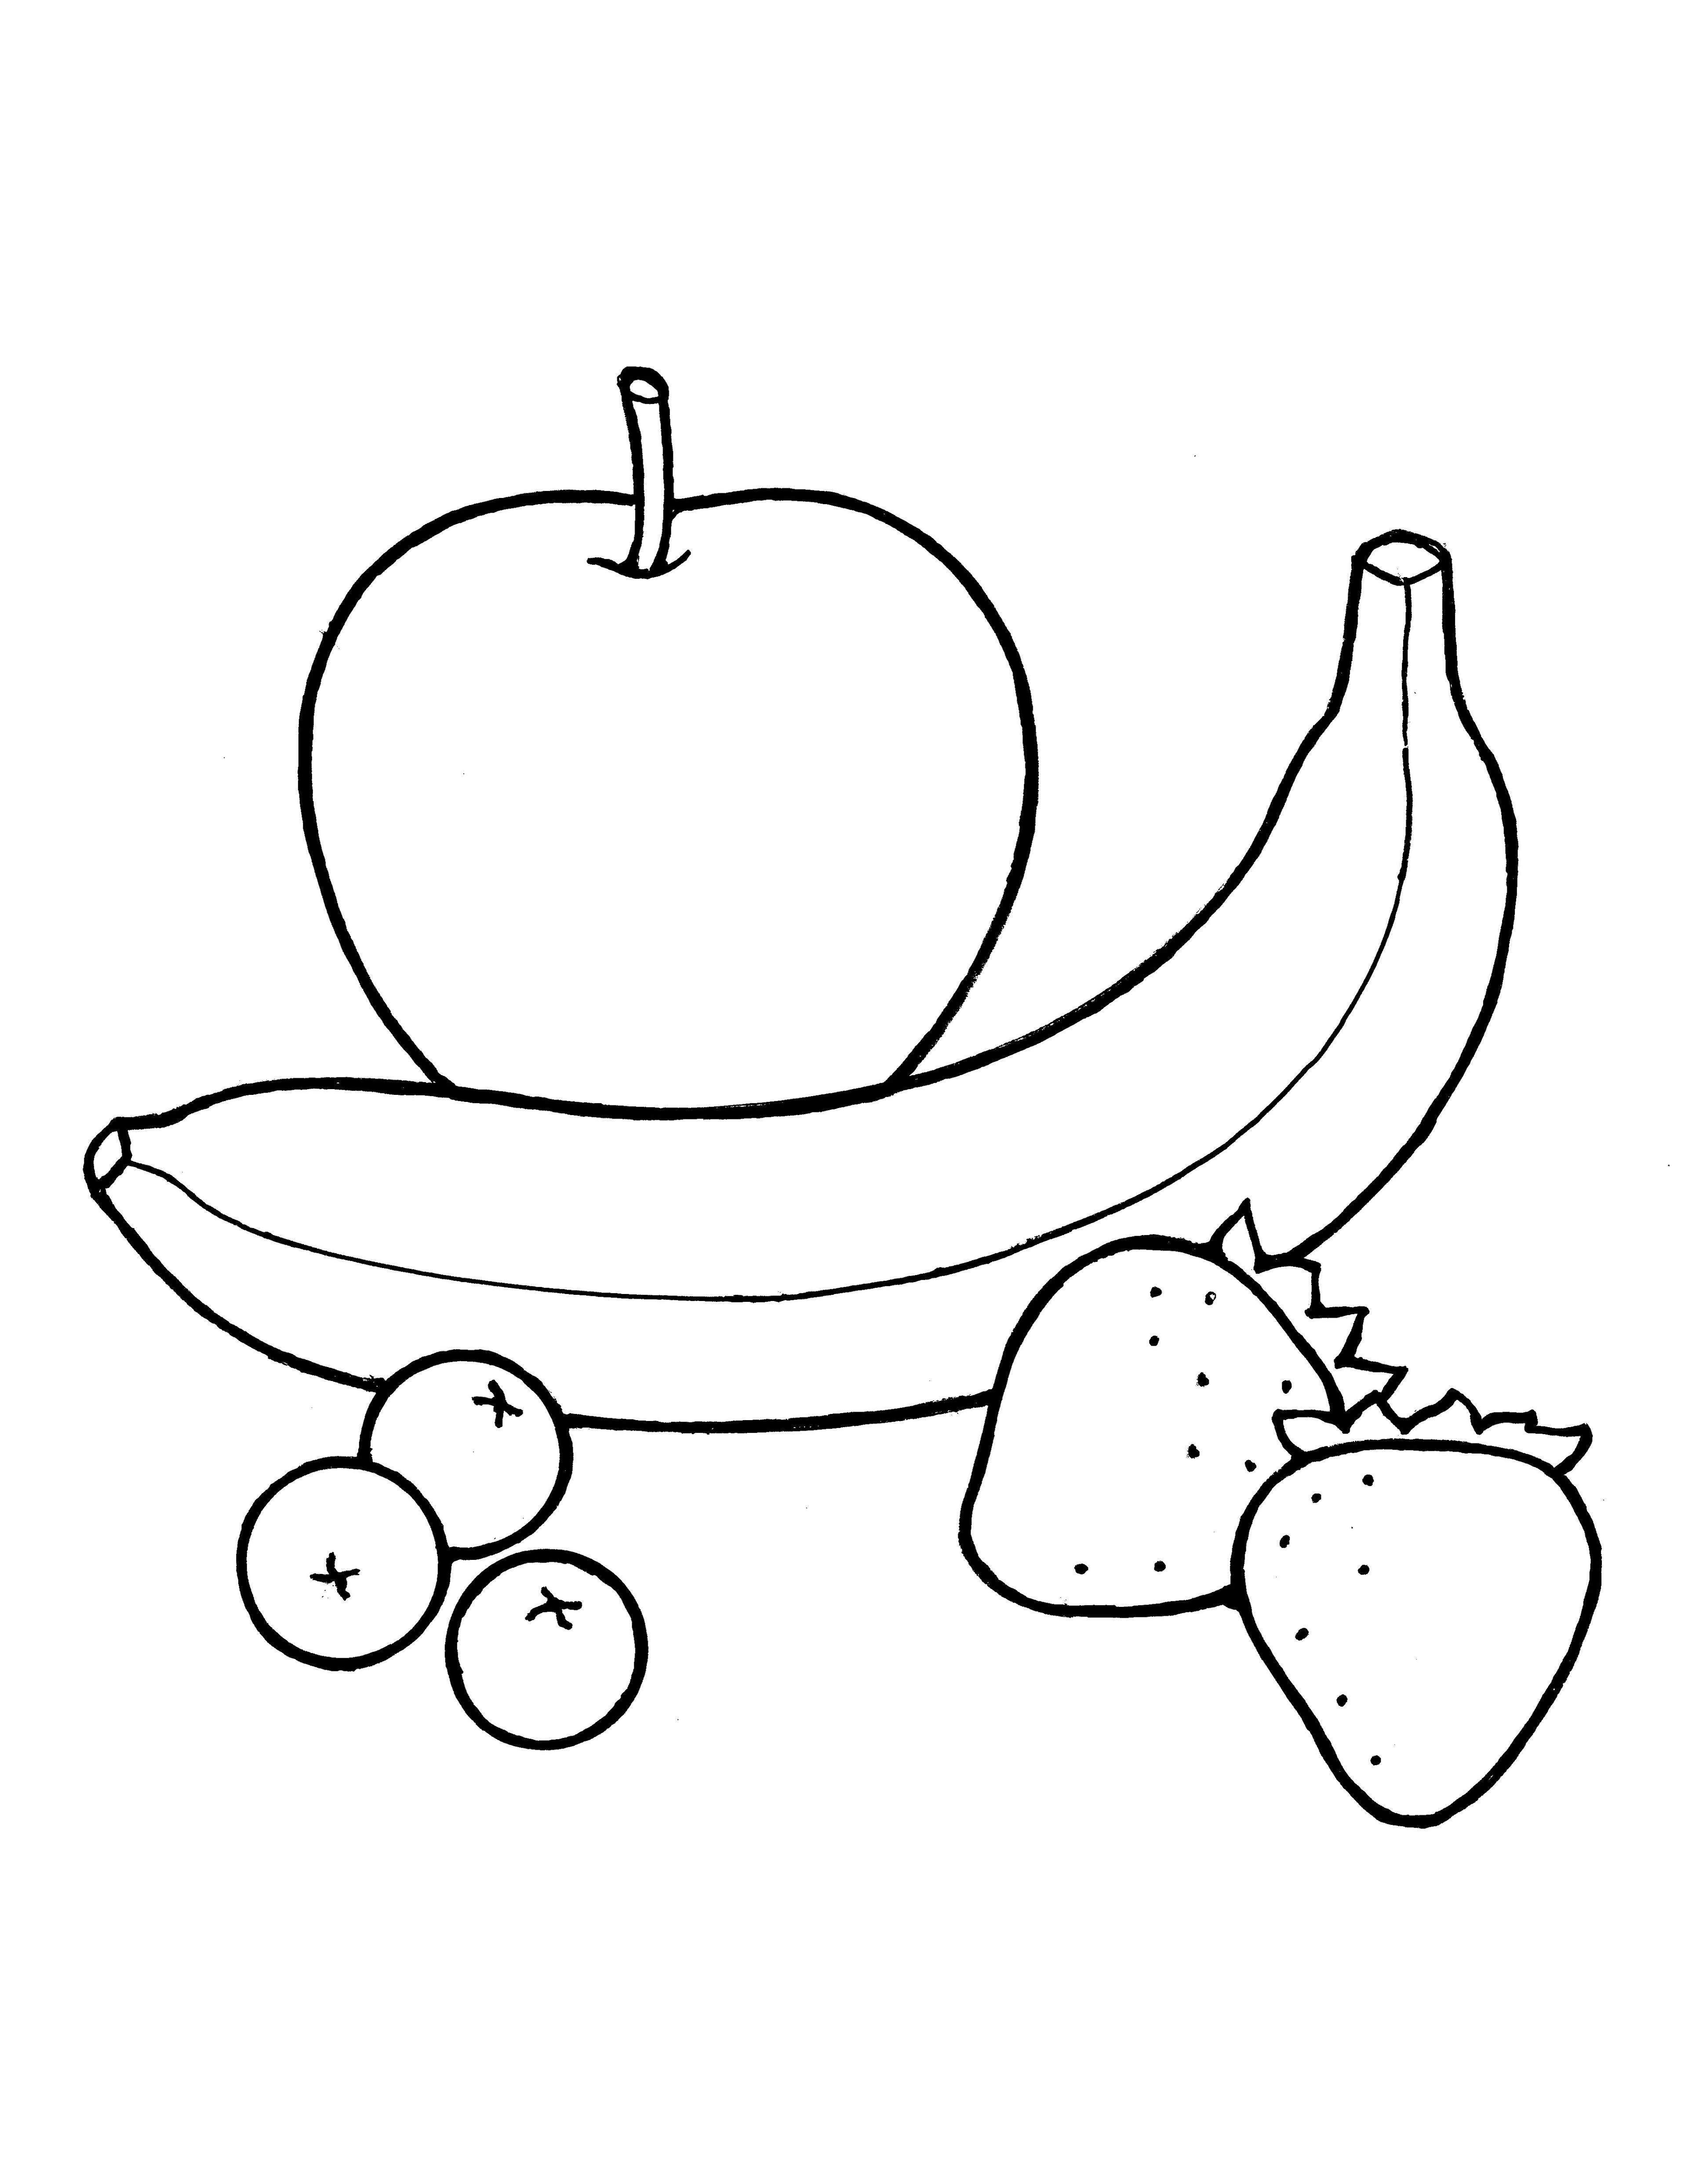 An illustration of fruit from the nursery manual Behold Your Little Ones (2008), pages 47 and 75.